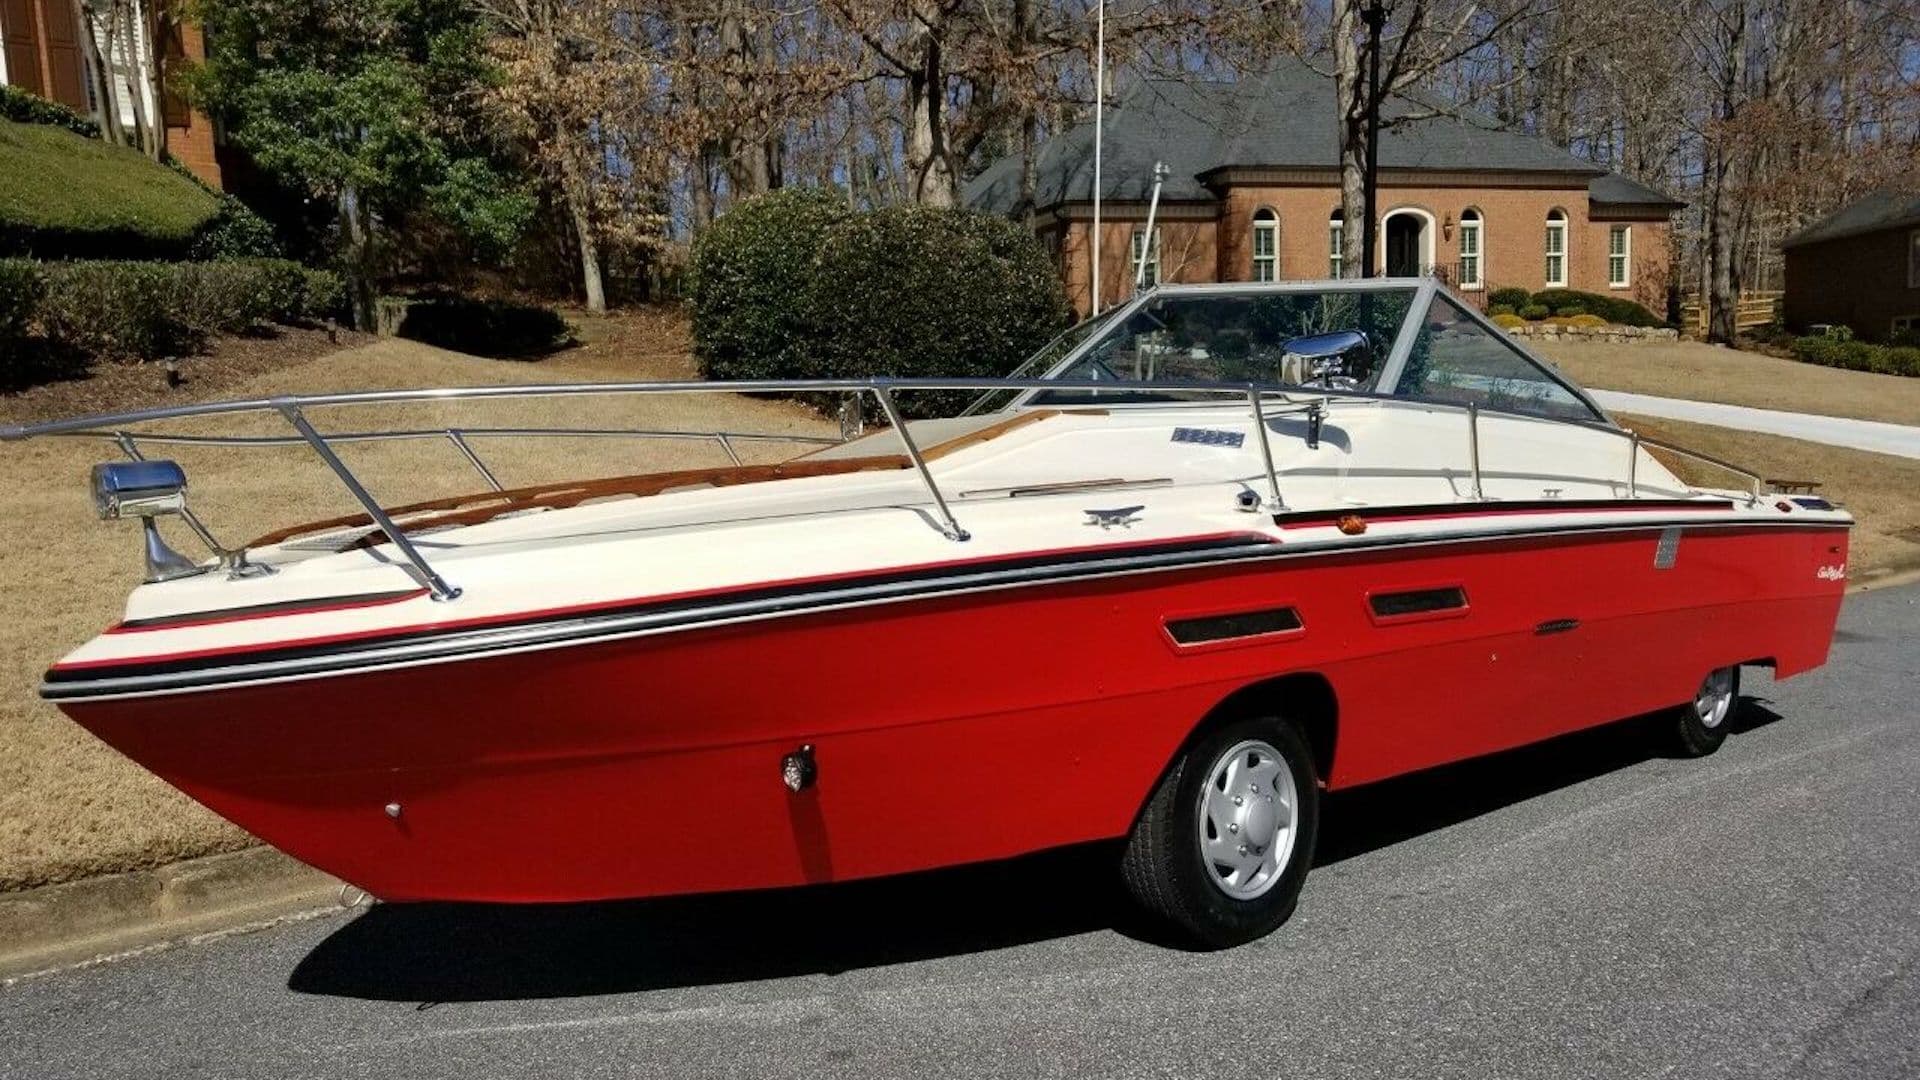 Sail the Roads in This Ford E-350 Van-Based Boat Car for $55,000